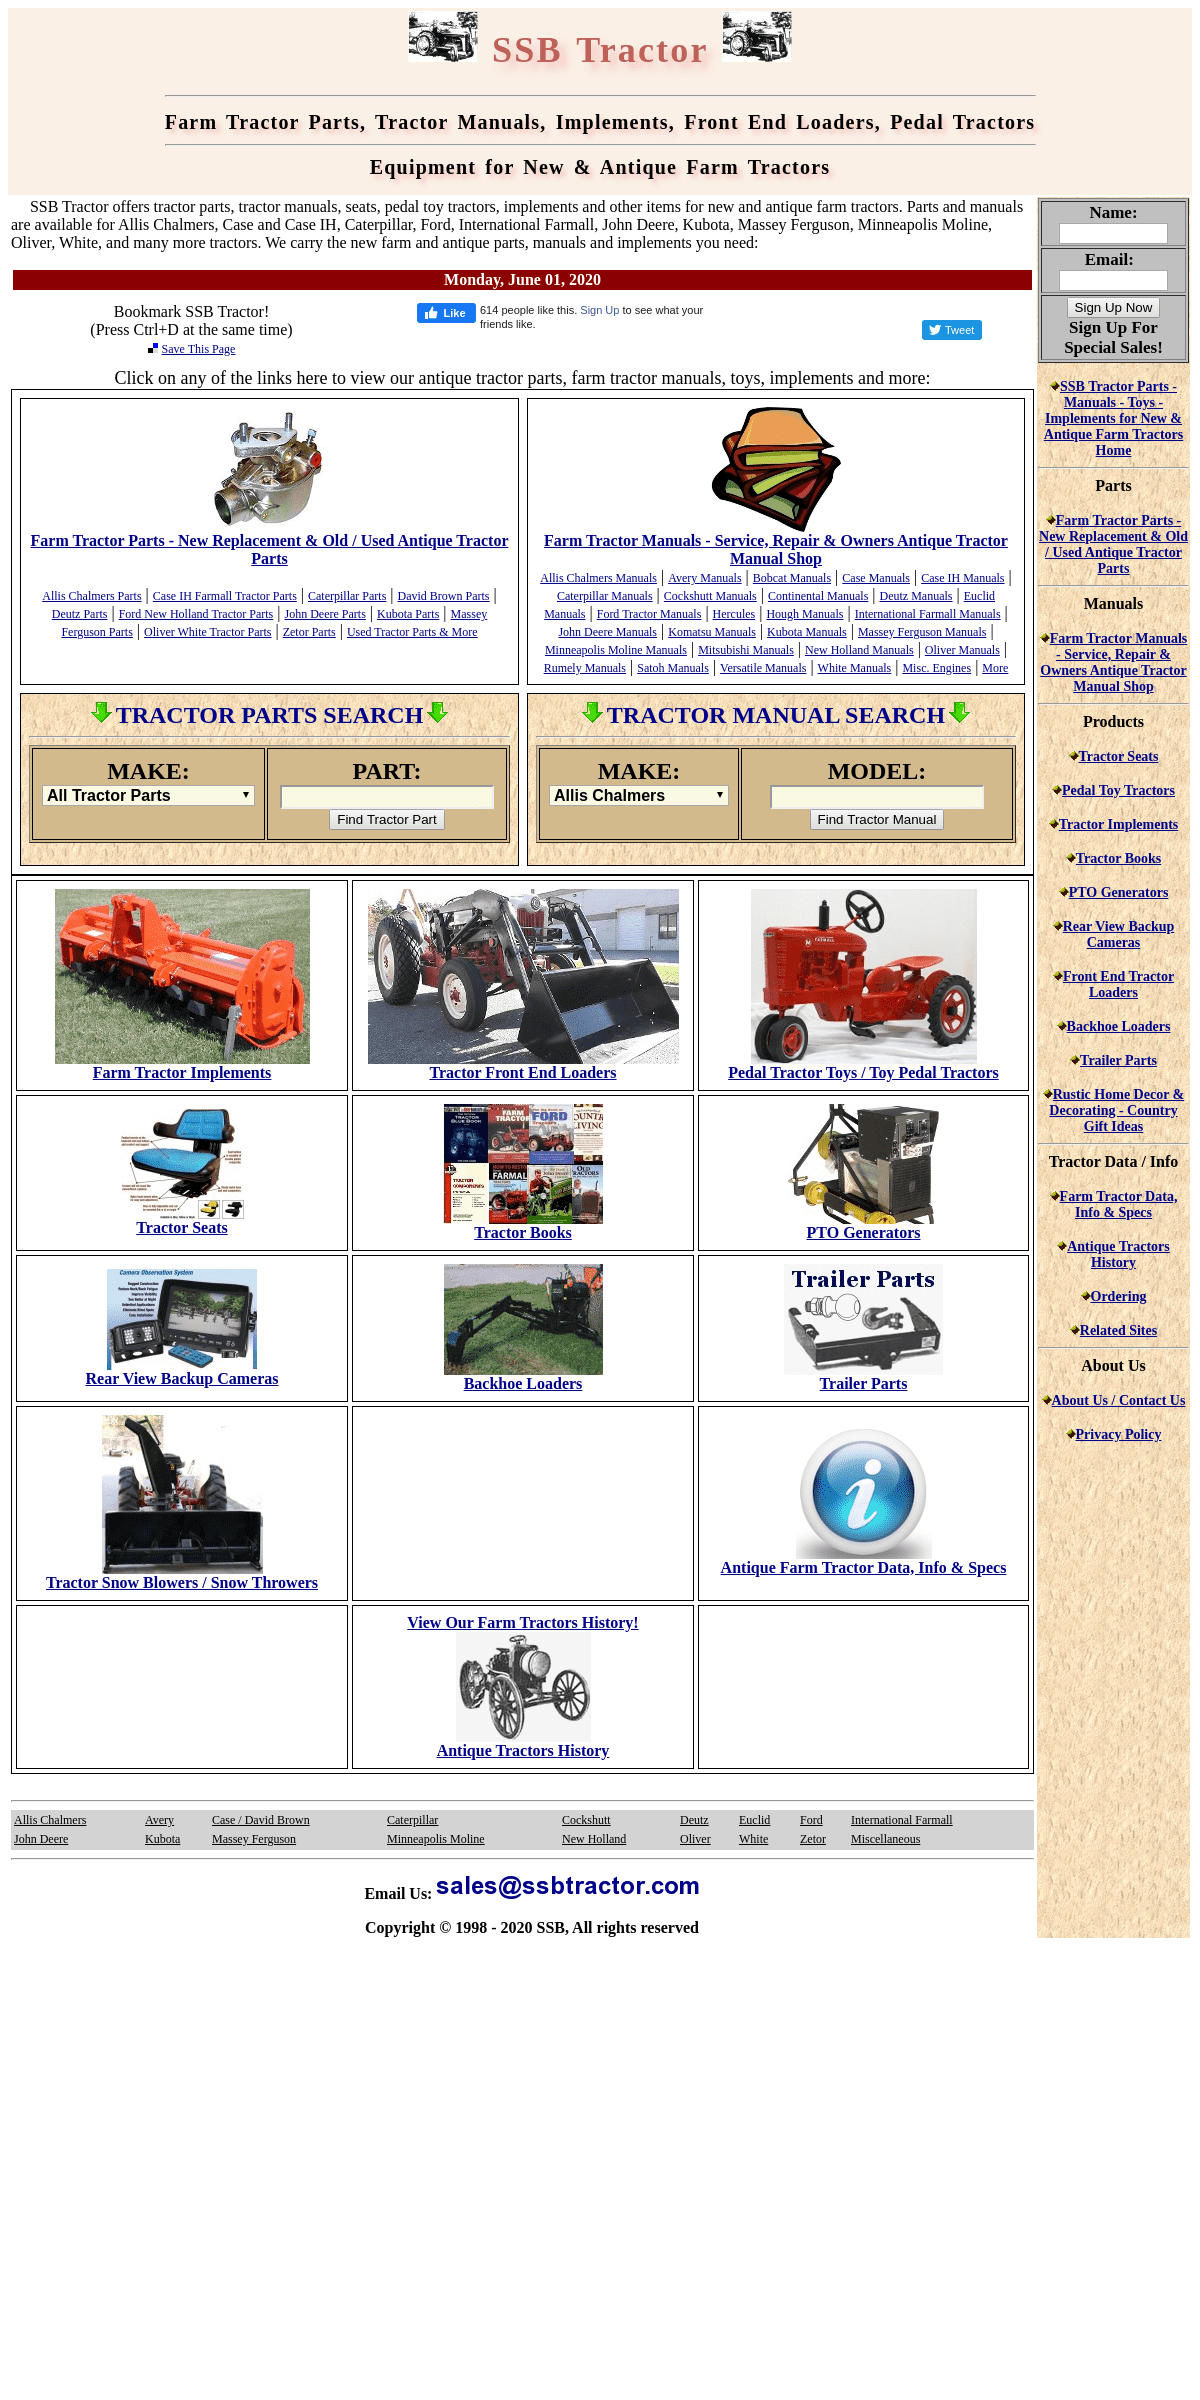 A complete backup of ssbtractor.com